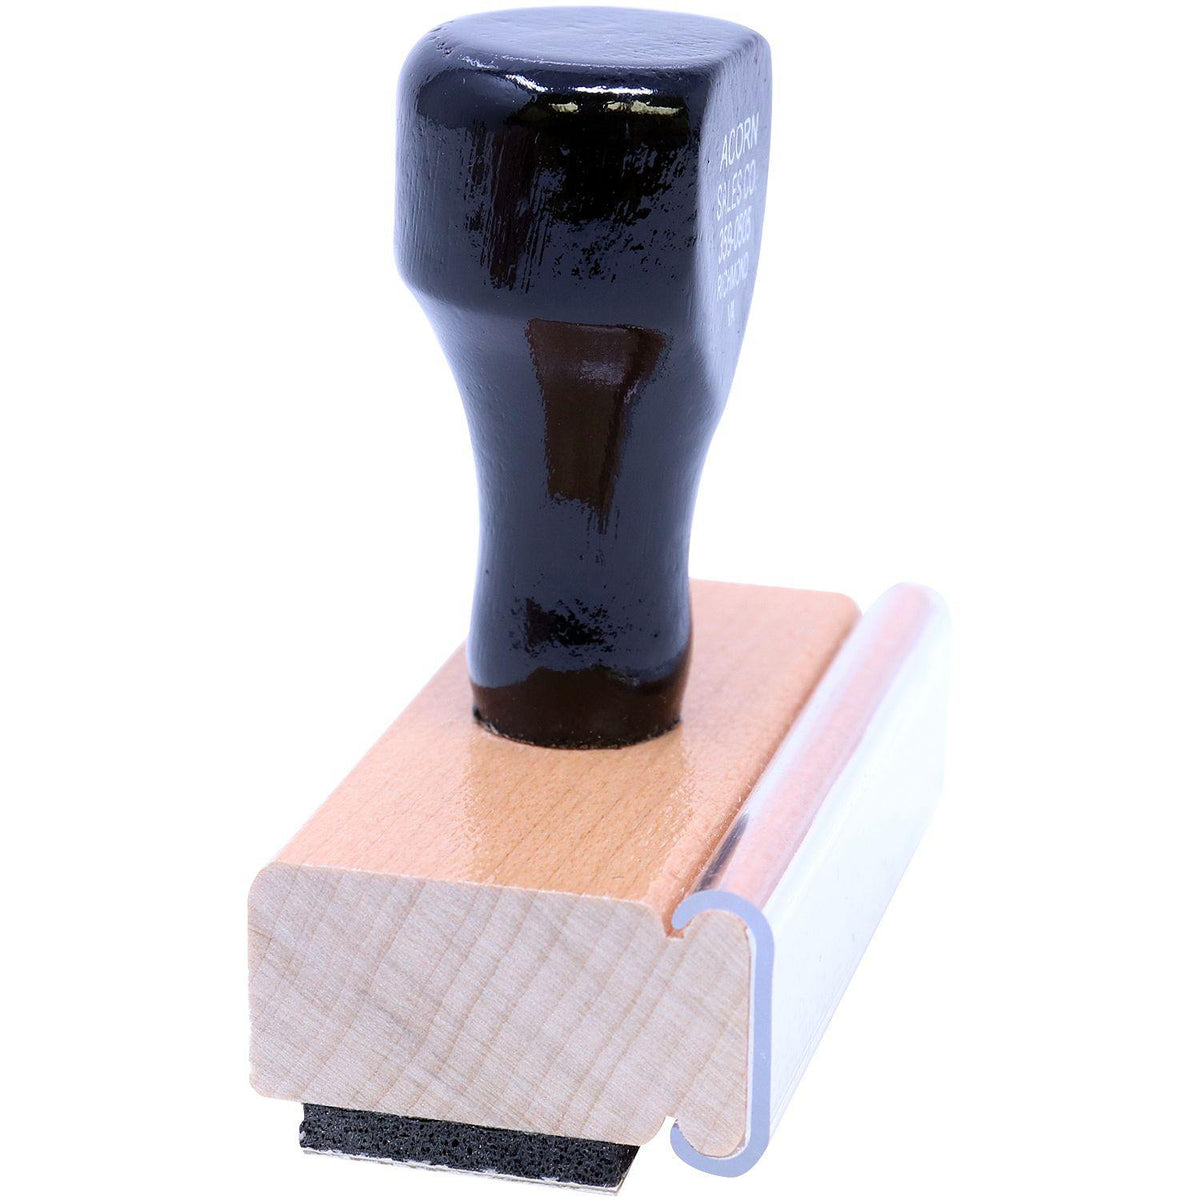 Side View of Installment Loan Rubber Stamp at an Angle